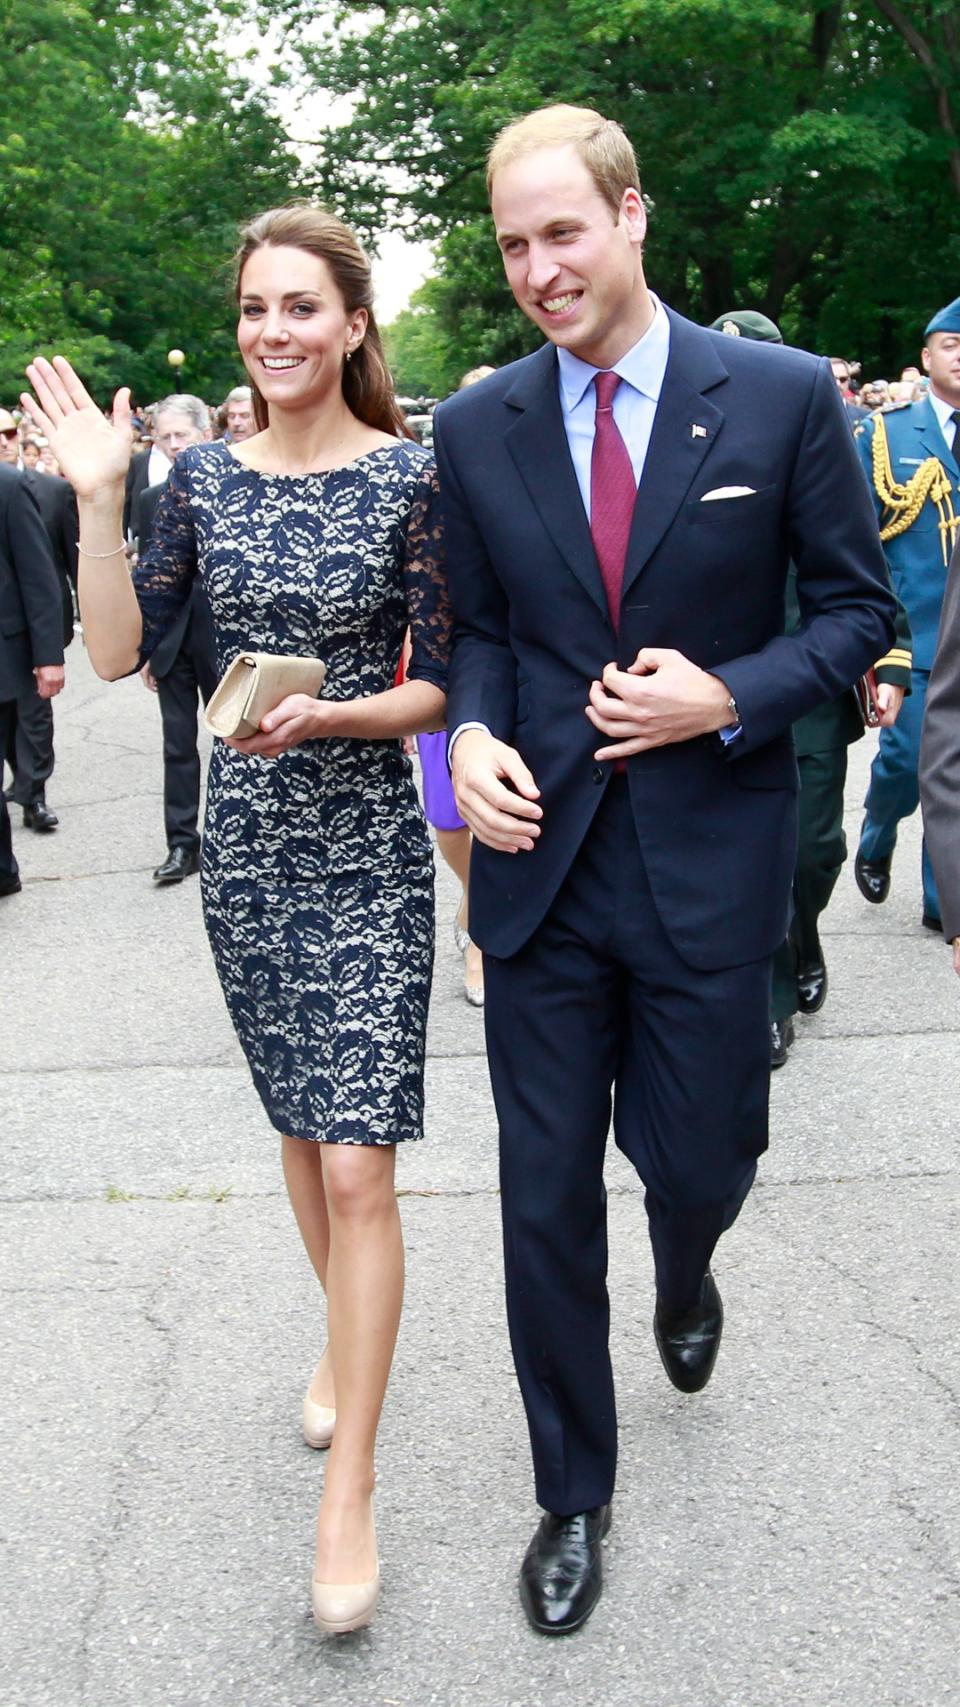 Prince William and Kate Middleton on their first royal tour